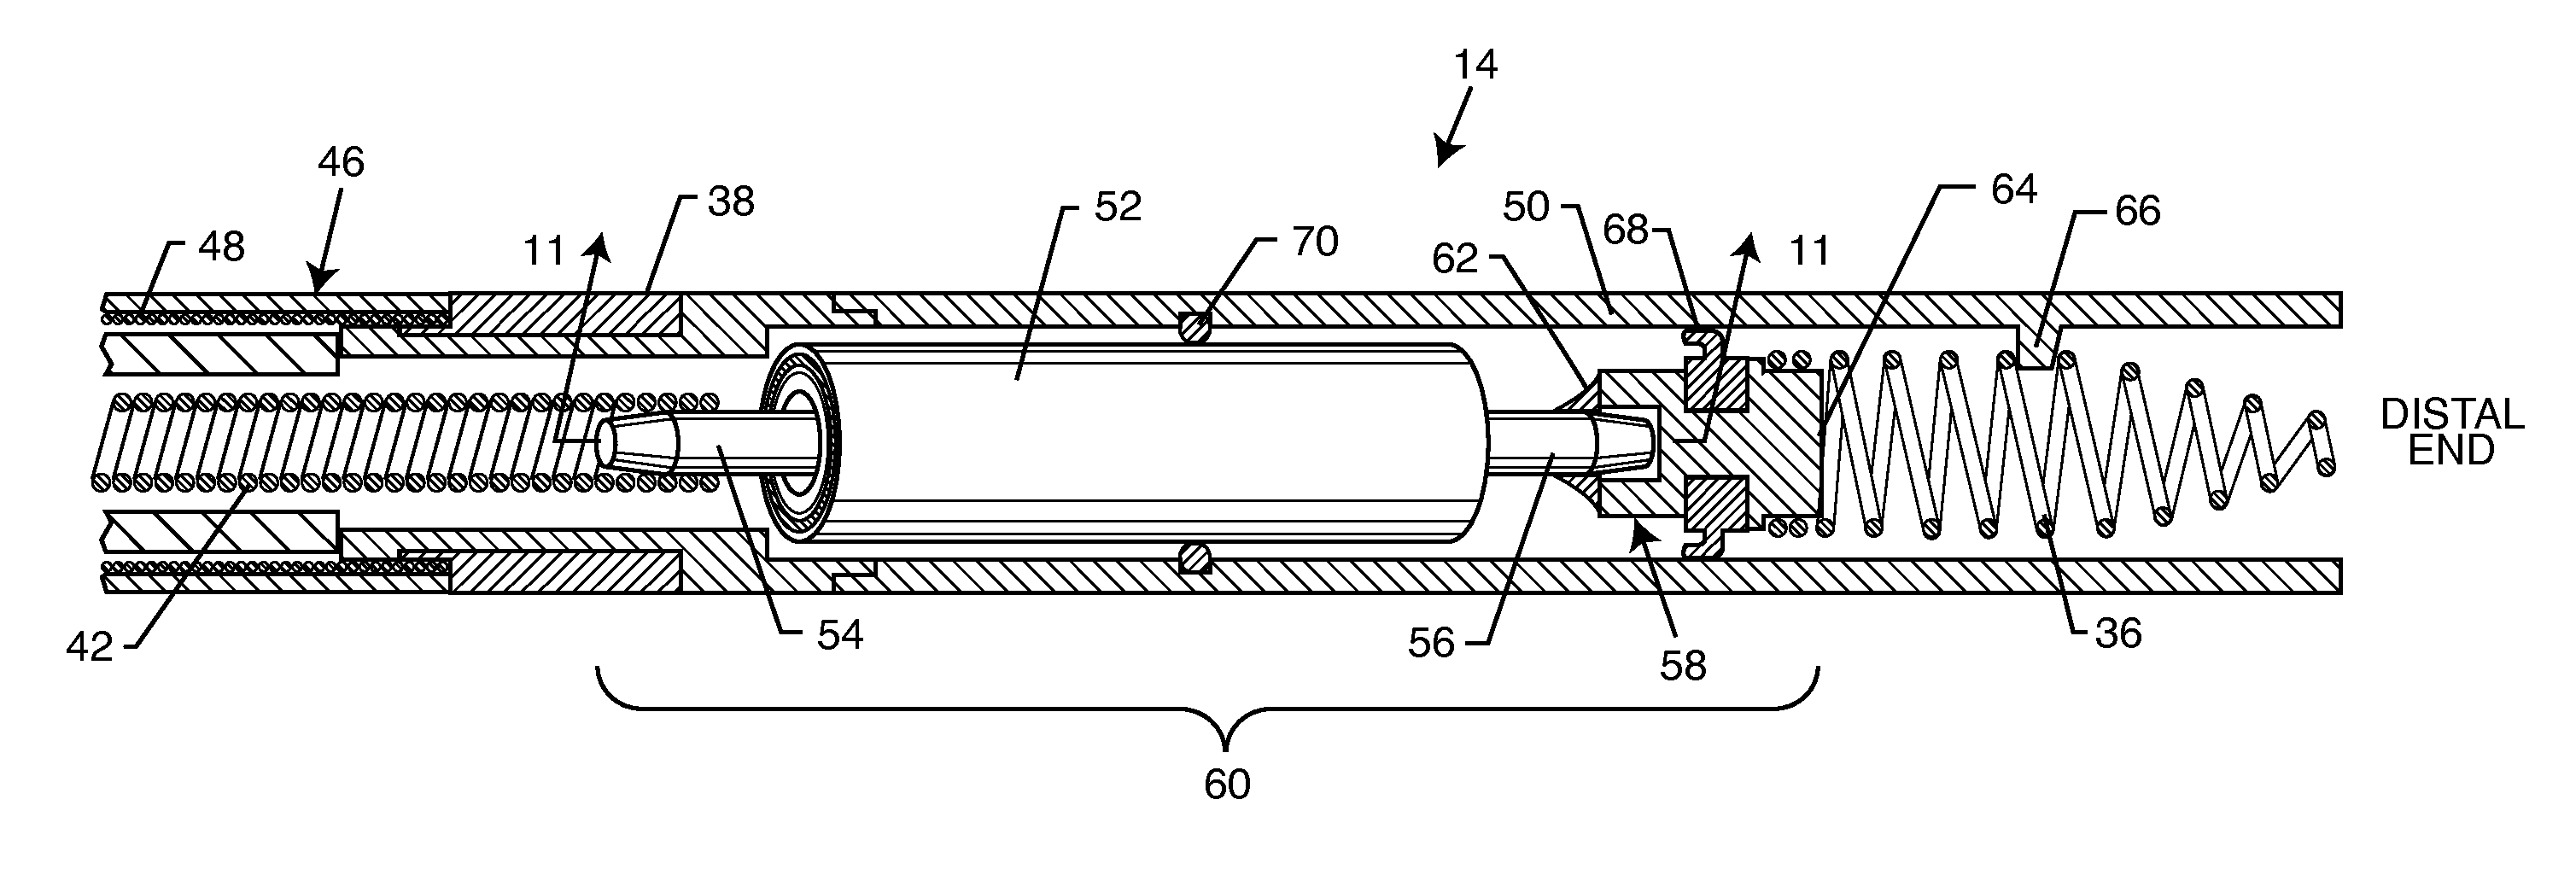 Electrically isolating electrical components in a medical electrical lead with an active fixation electrode